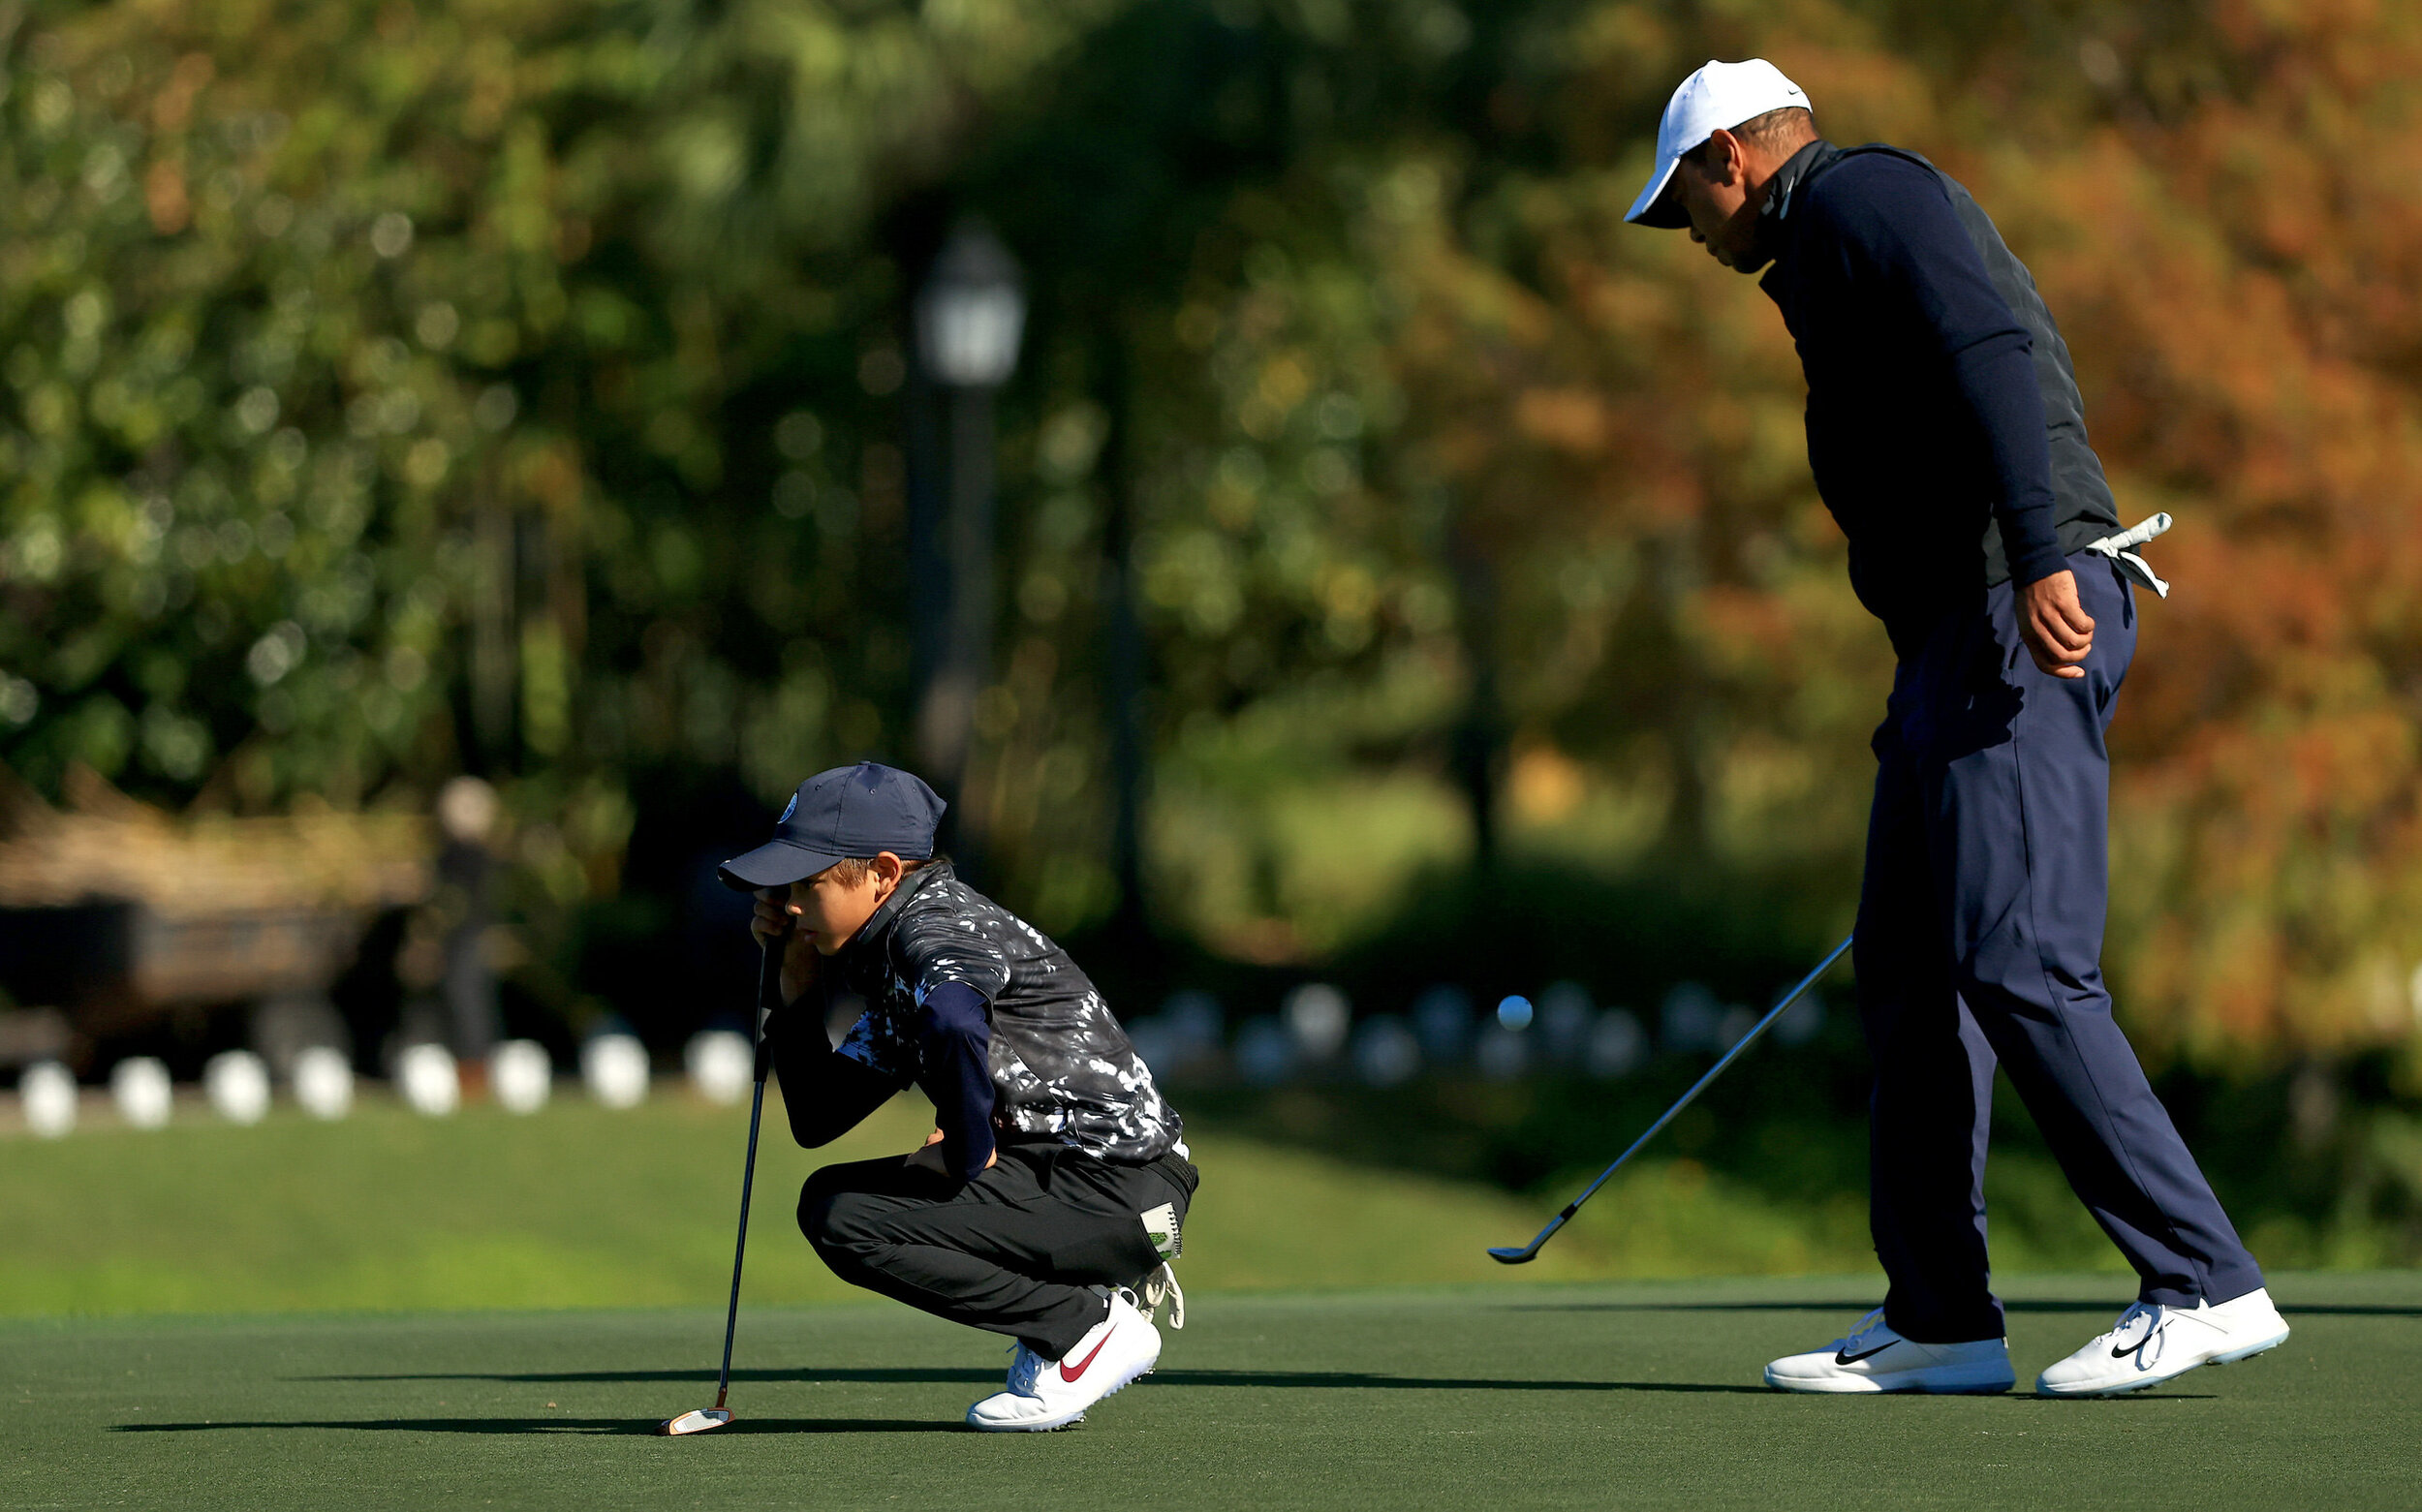  ORLANDO, FLORIDA - DECEMBER 18: Tiger Woods of the United States and son Charlie Woods line up a putt on the 18th hole during the Pro-Am for the PNC Championship at the Ritz Carlton Golf Club on December 18, 2020 in Orlando, Florida. (Photo by Mike 